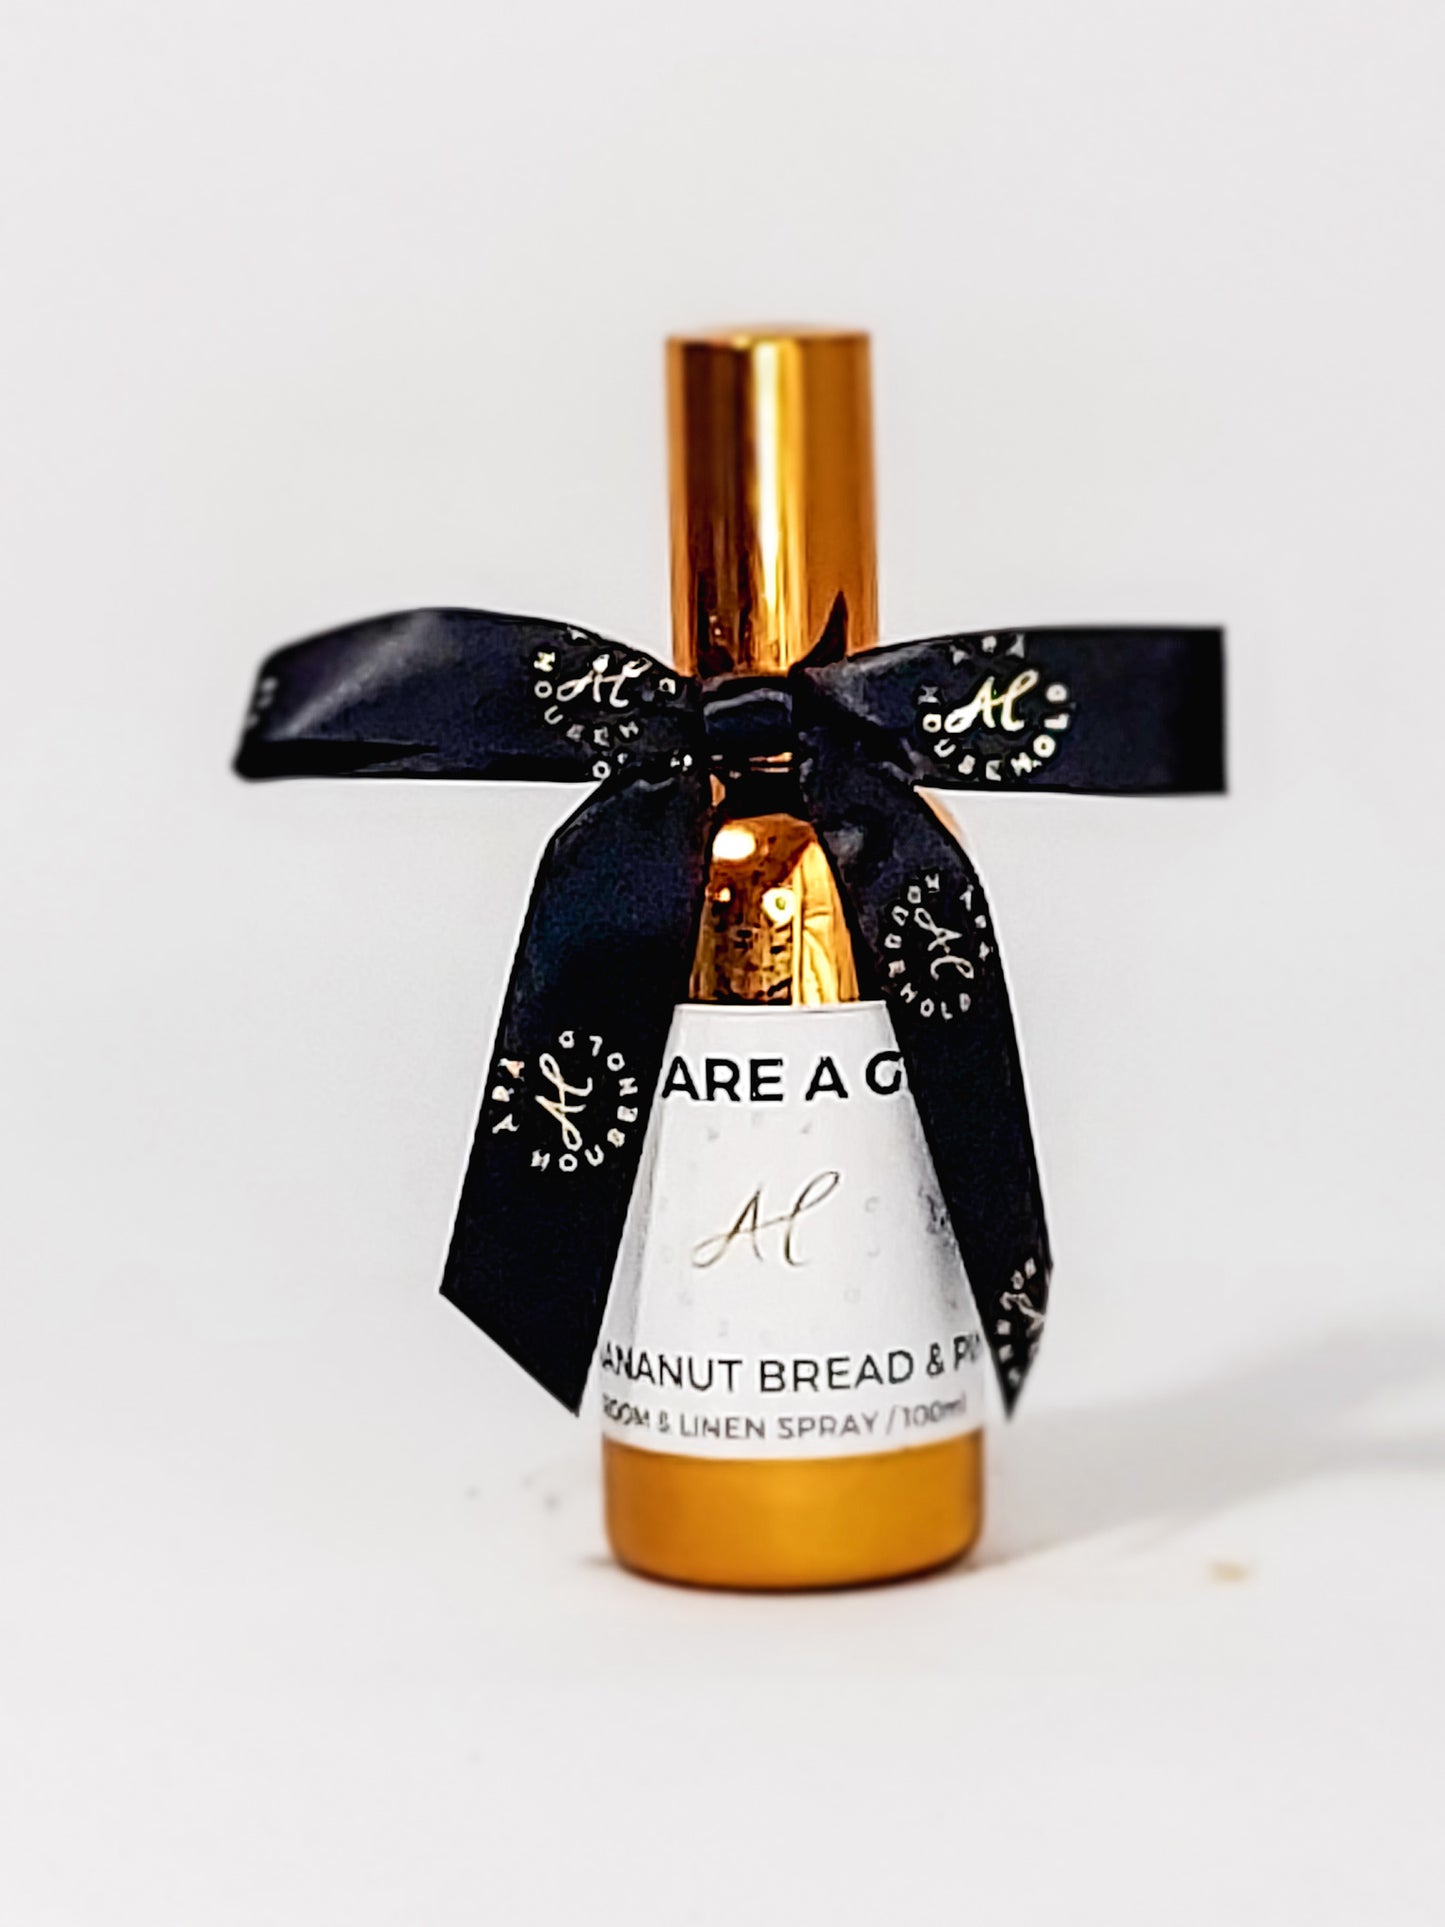 You are a Gift Luxury Room & Linen Spray